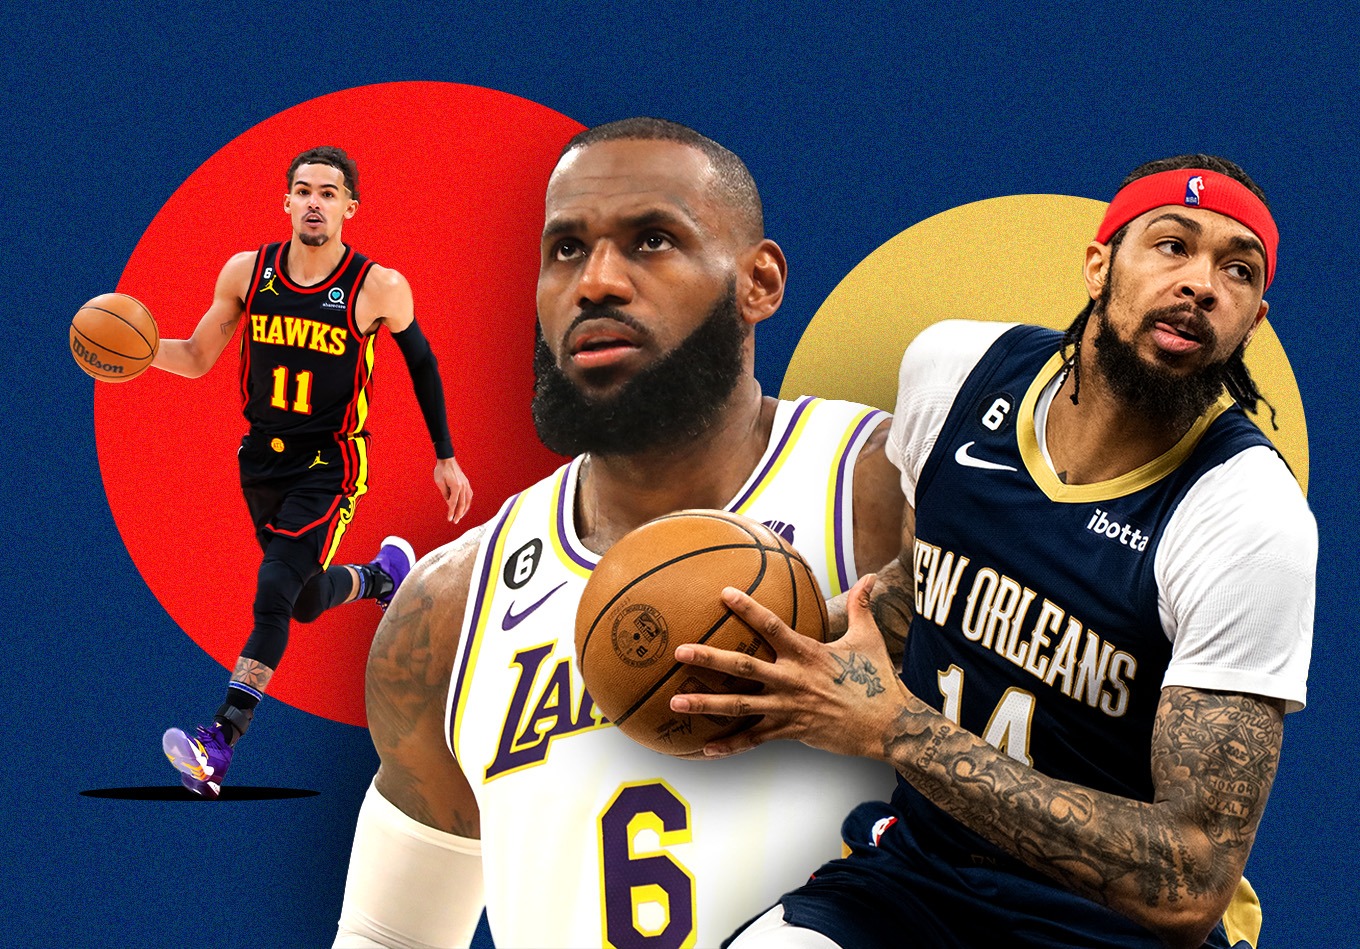 NBA Play-in Games: Every Team’s Chances of Making an Unlikely Playoff Run